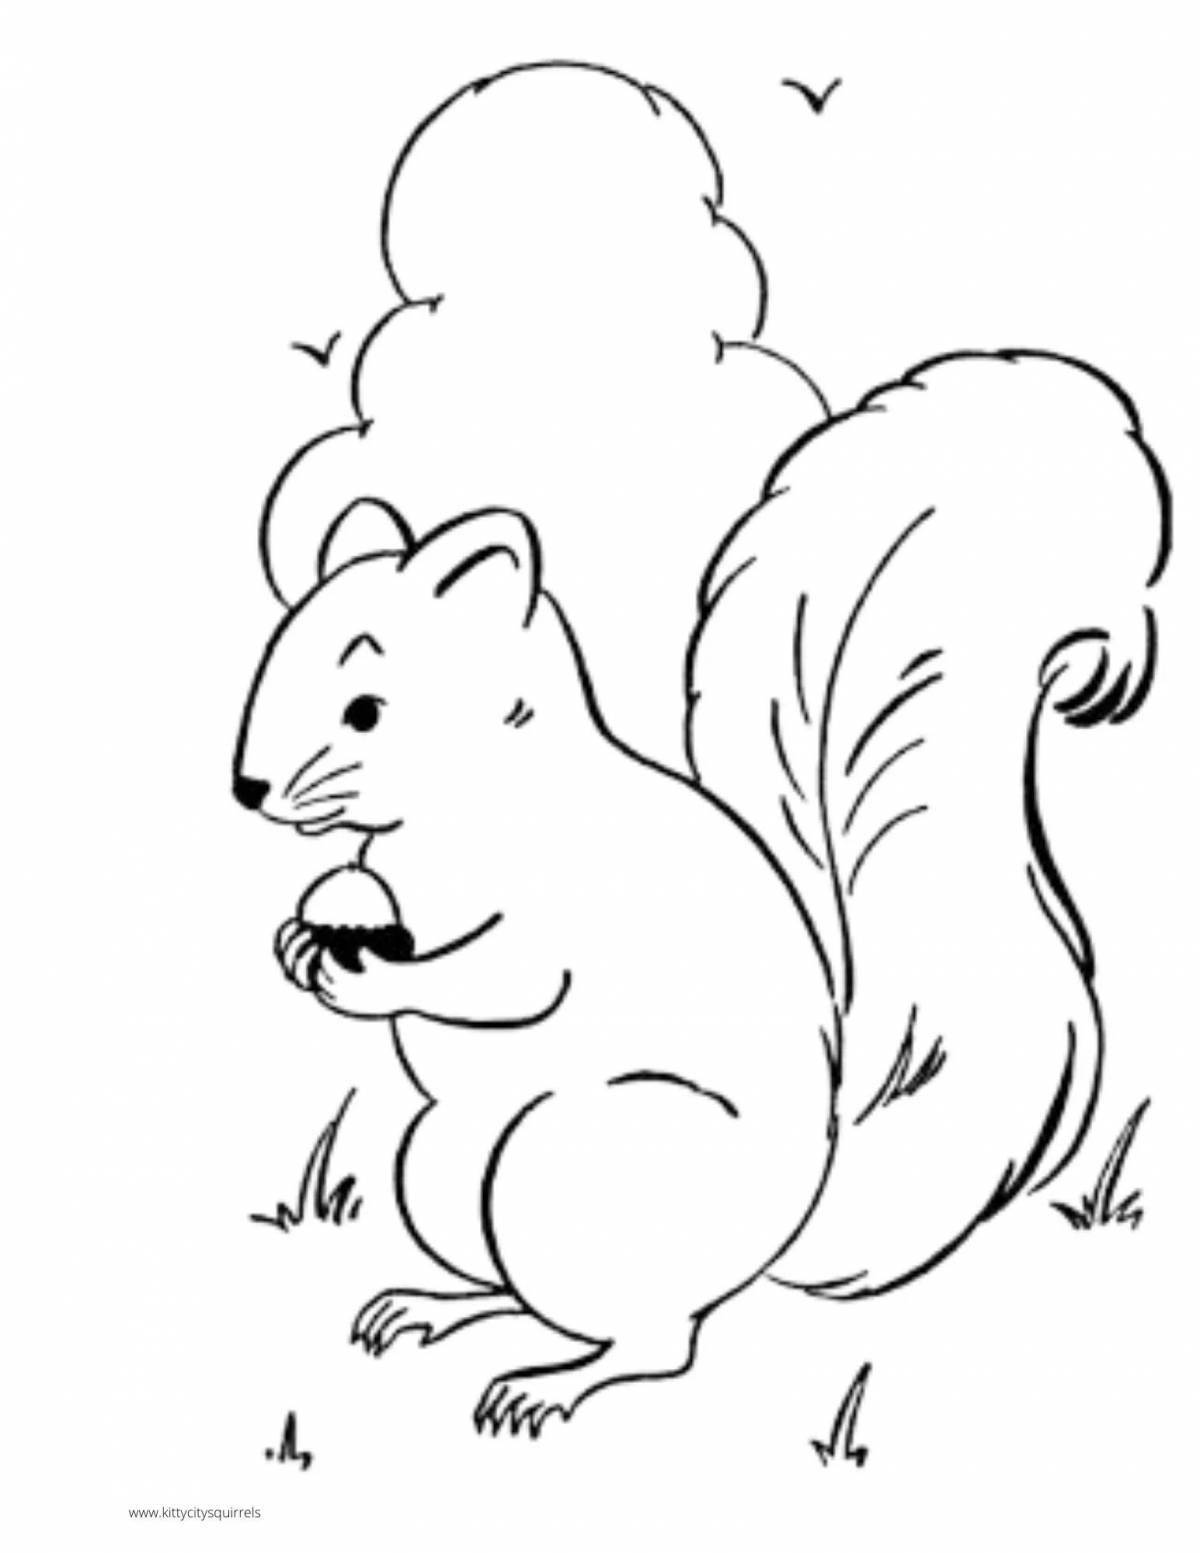 Animated squirrel coloring book for kids